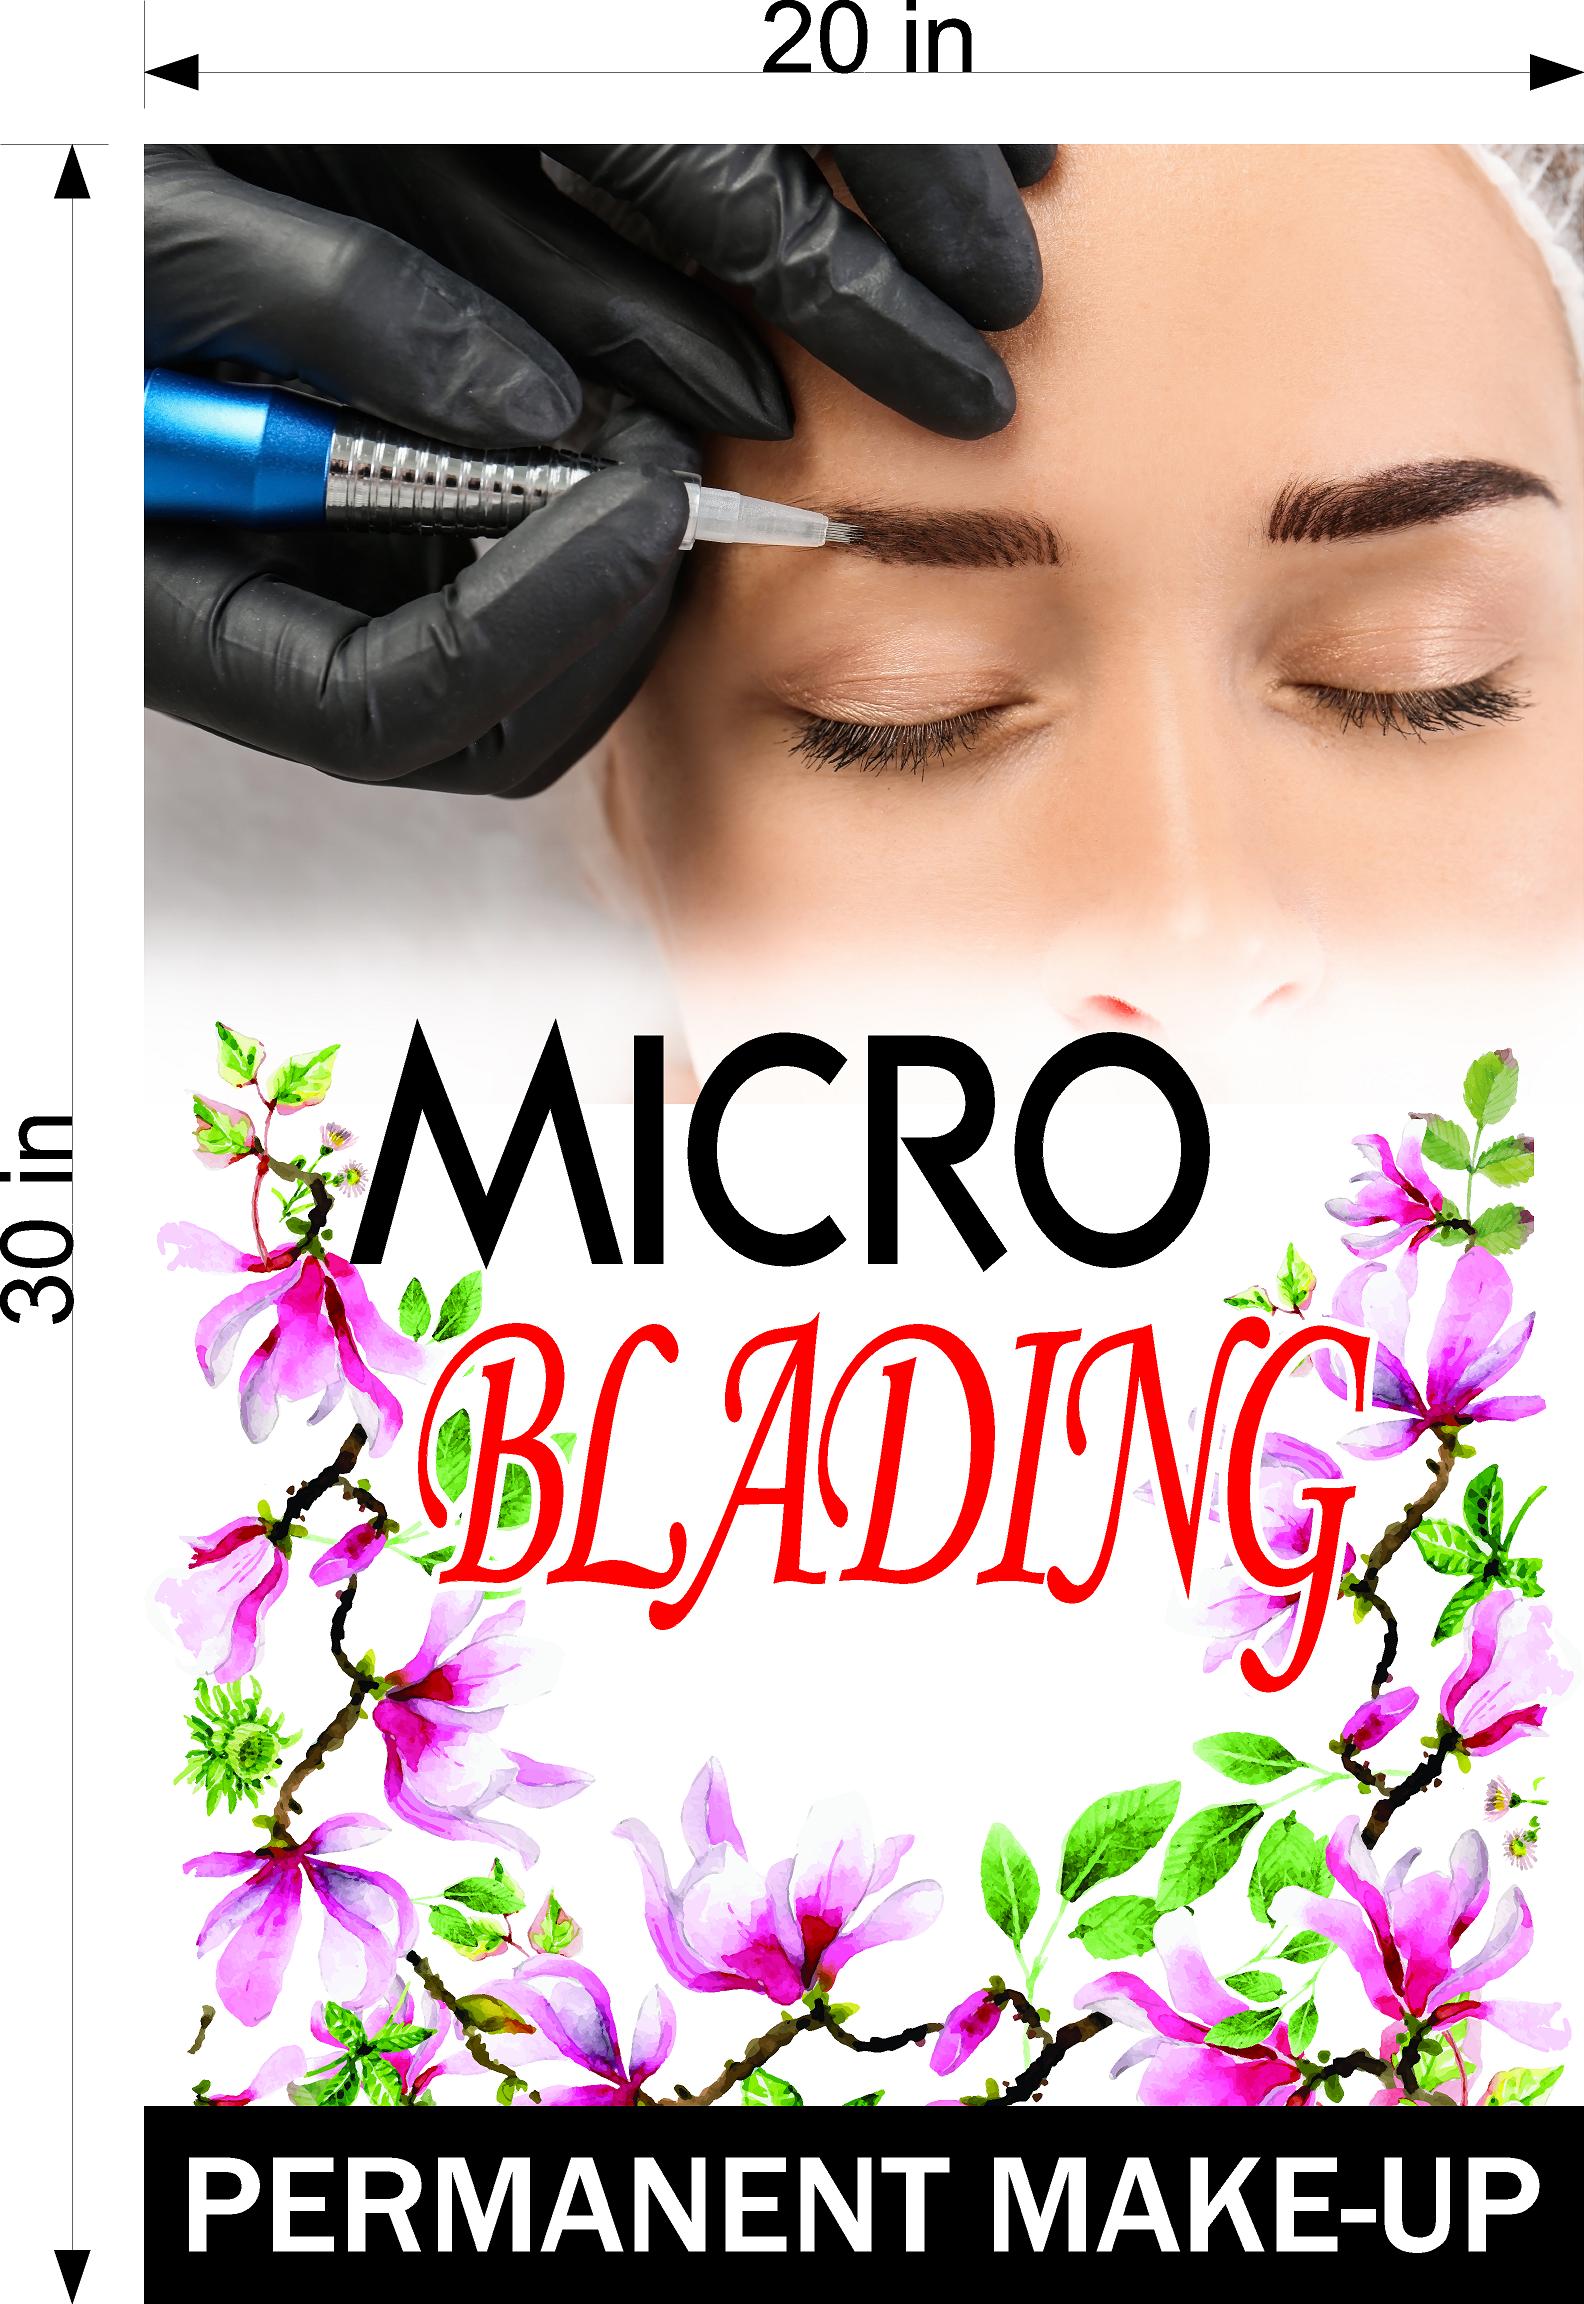 Microblading 11 Perforated Mesh One Way Vision See-Through Window Vinyl Salon Services Permanent Make-Up Vertical